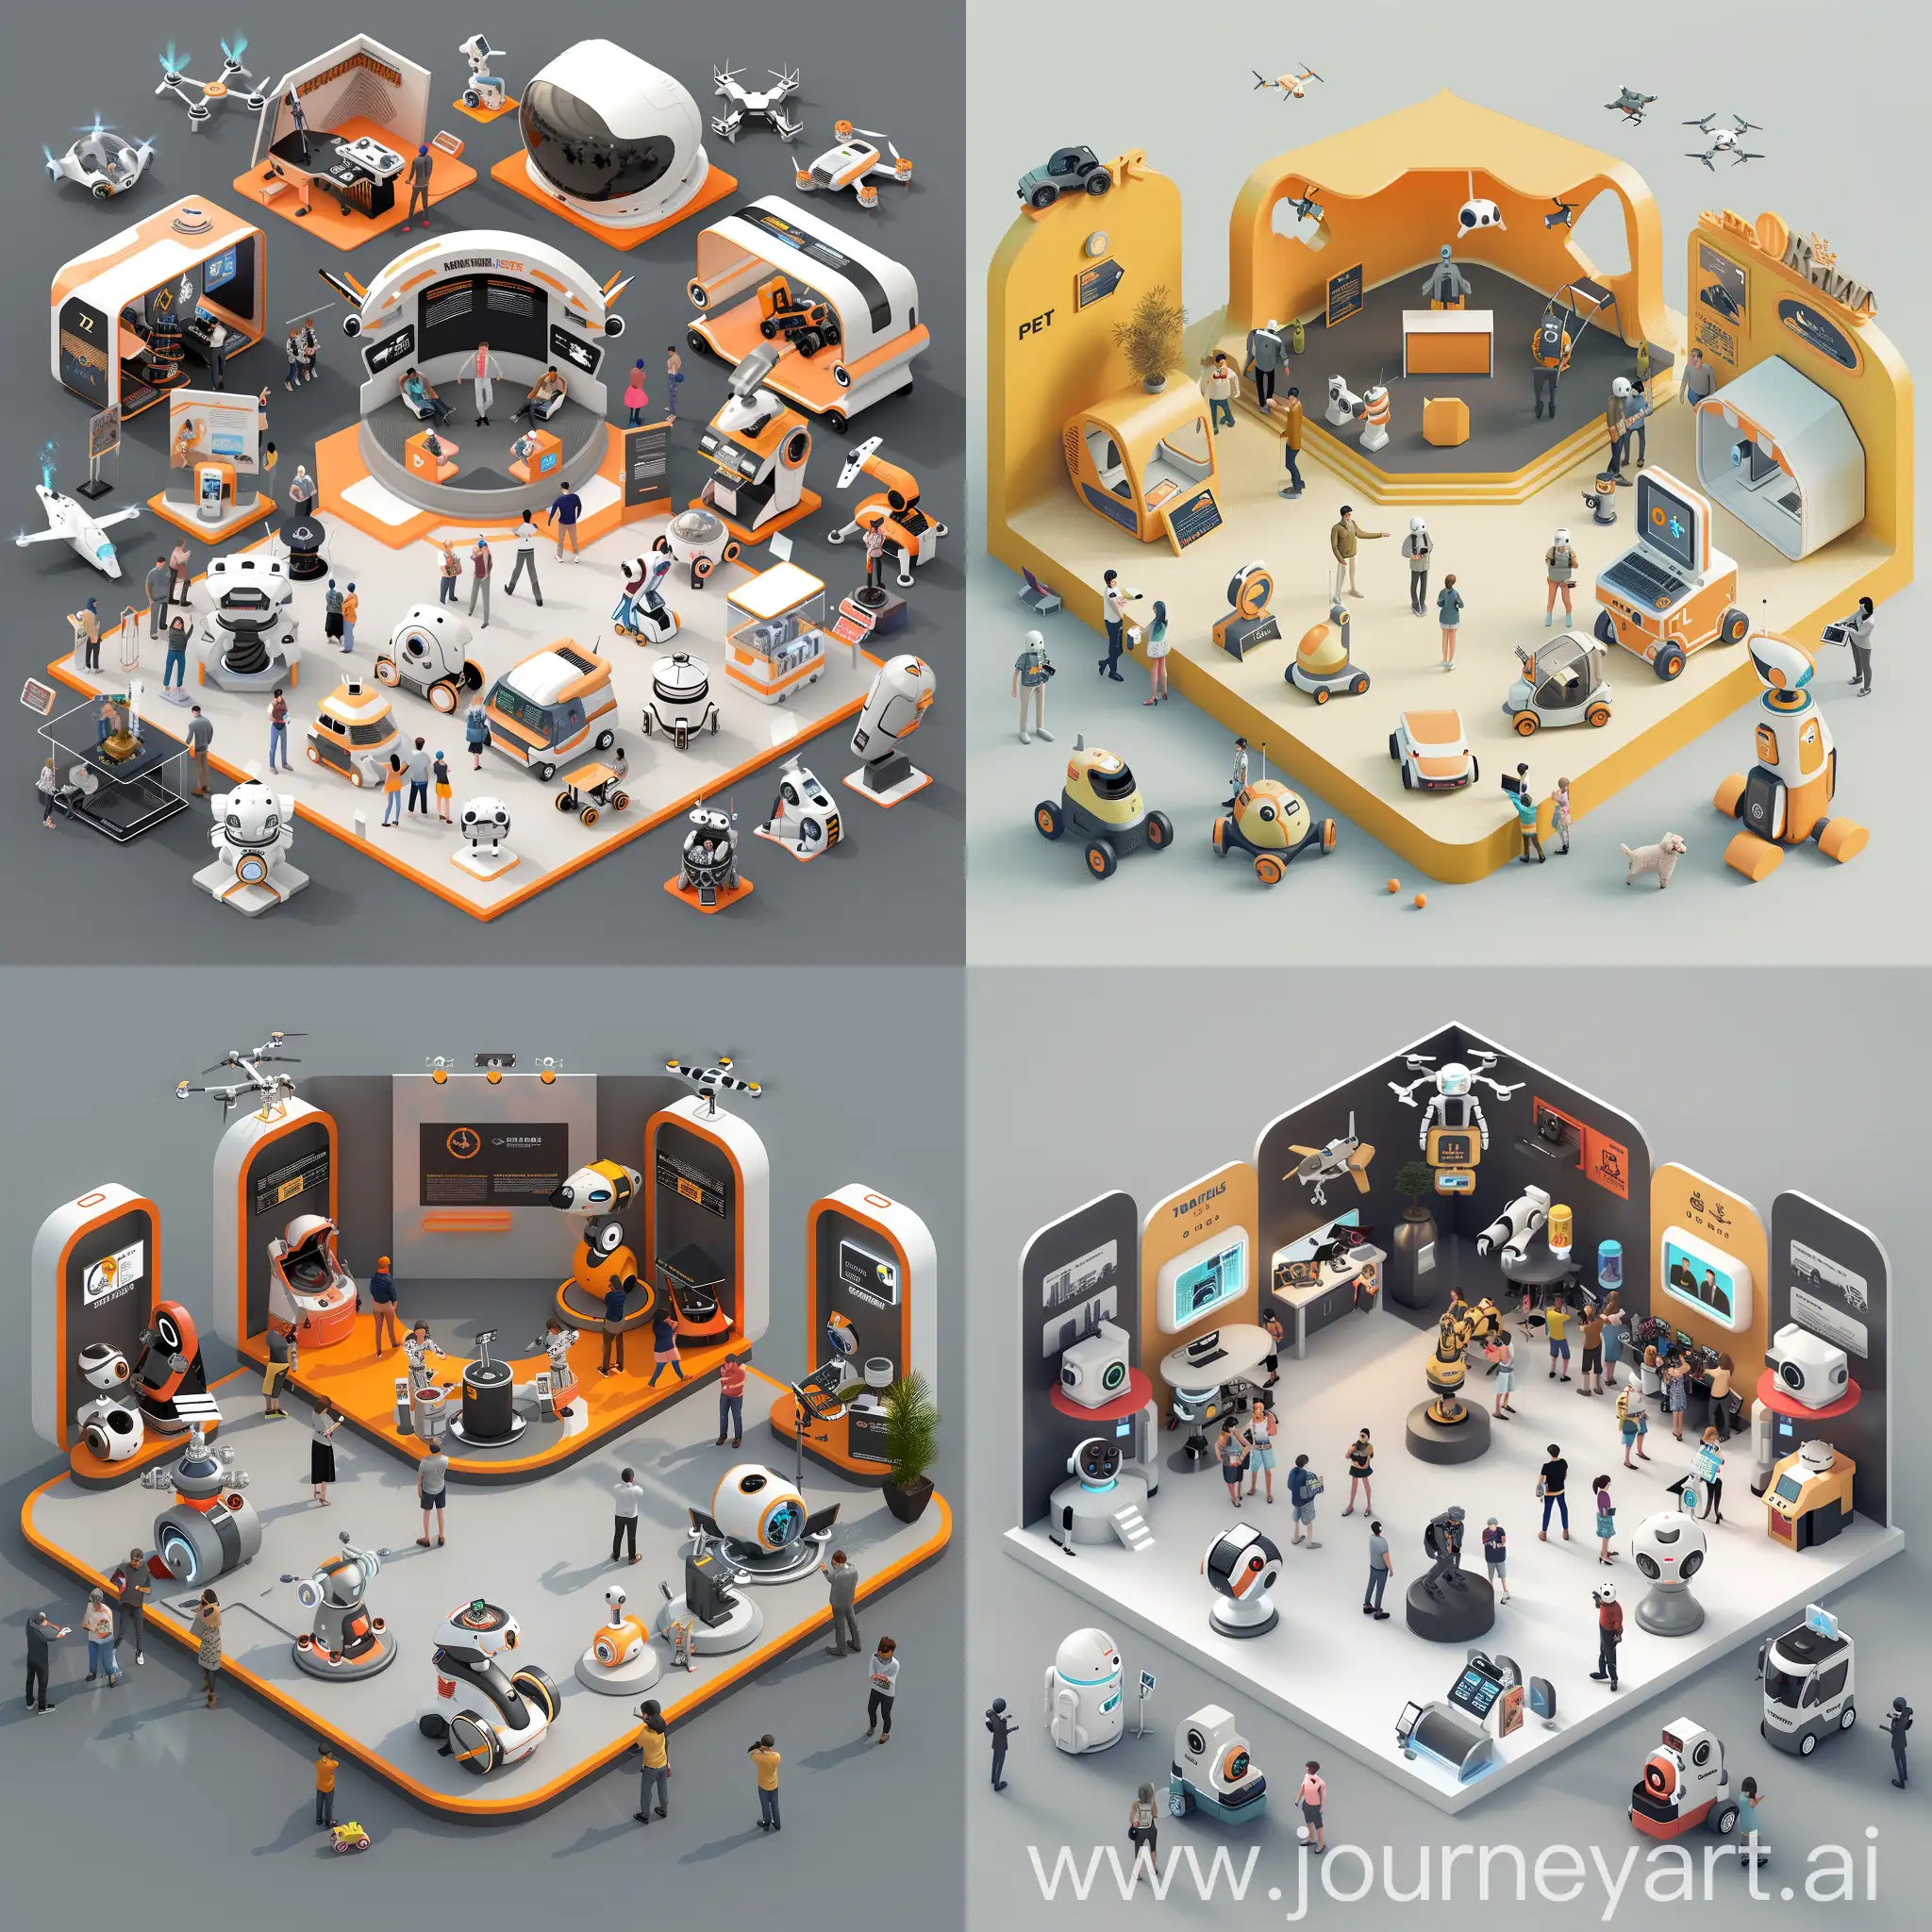 Create a 3d illustration image of Mobile robotics such as drones, Collaborative robots, industrial automation robots, pet robots, mobility assistant robots, housekeeper robots, robot dogs, military robots in the theme park(actually, it's exhibition hall). A small stage is set up in the center of the park to announce and publicize new robots, and people gather at each booth surrounding the stage to freely experience various robots.